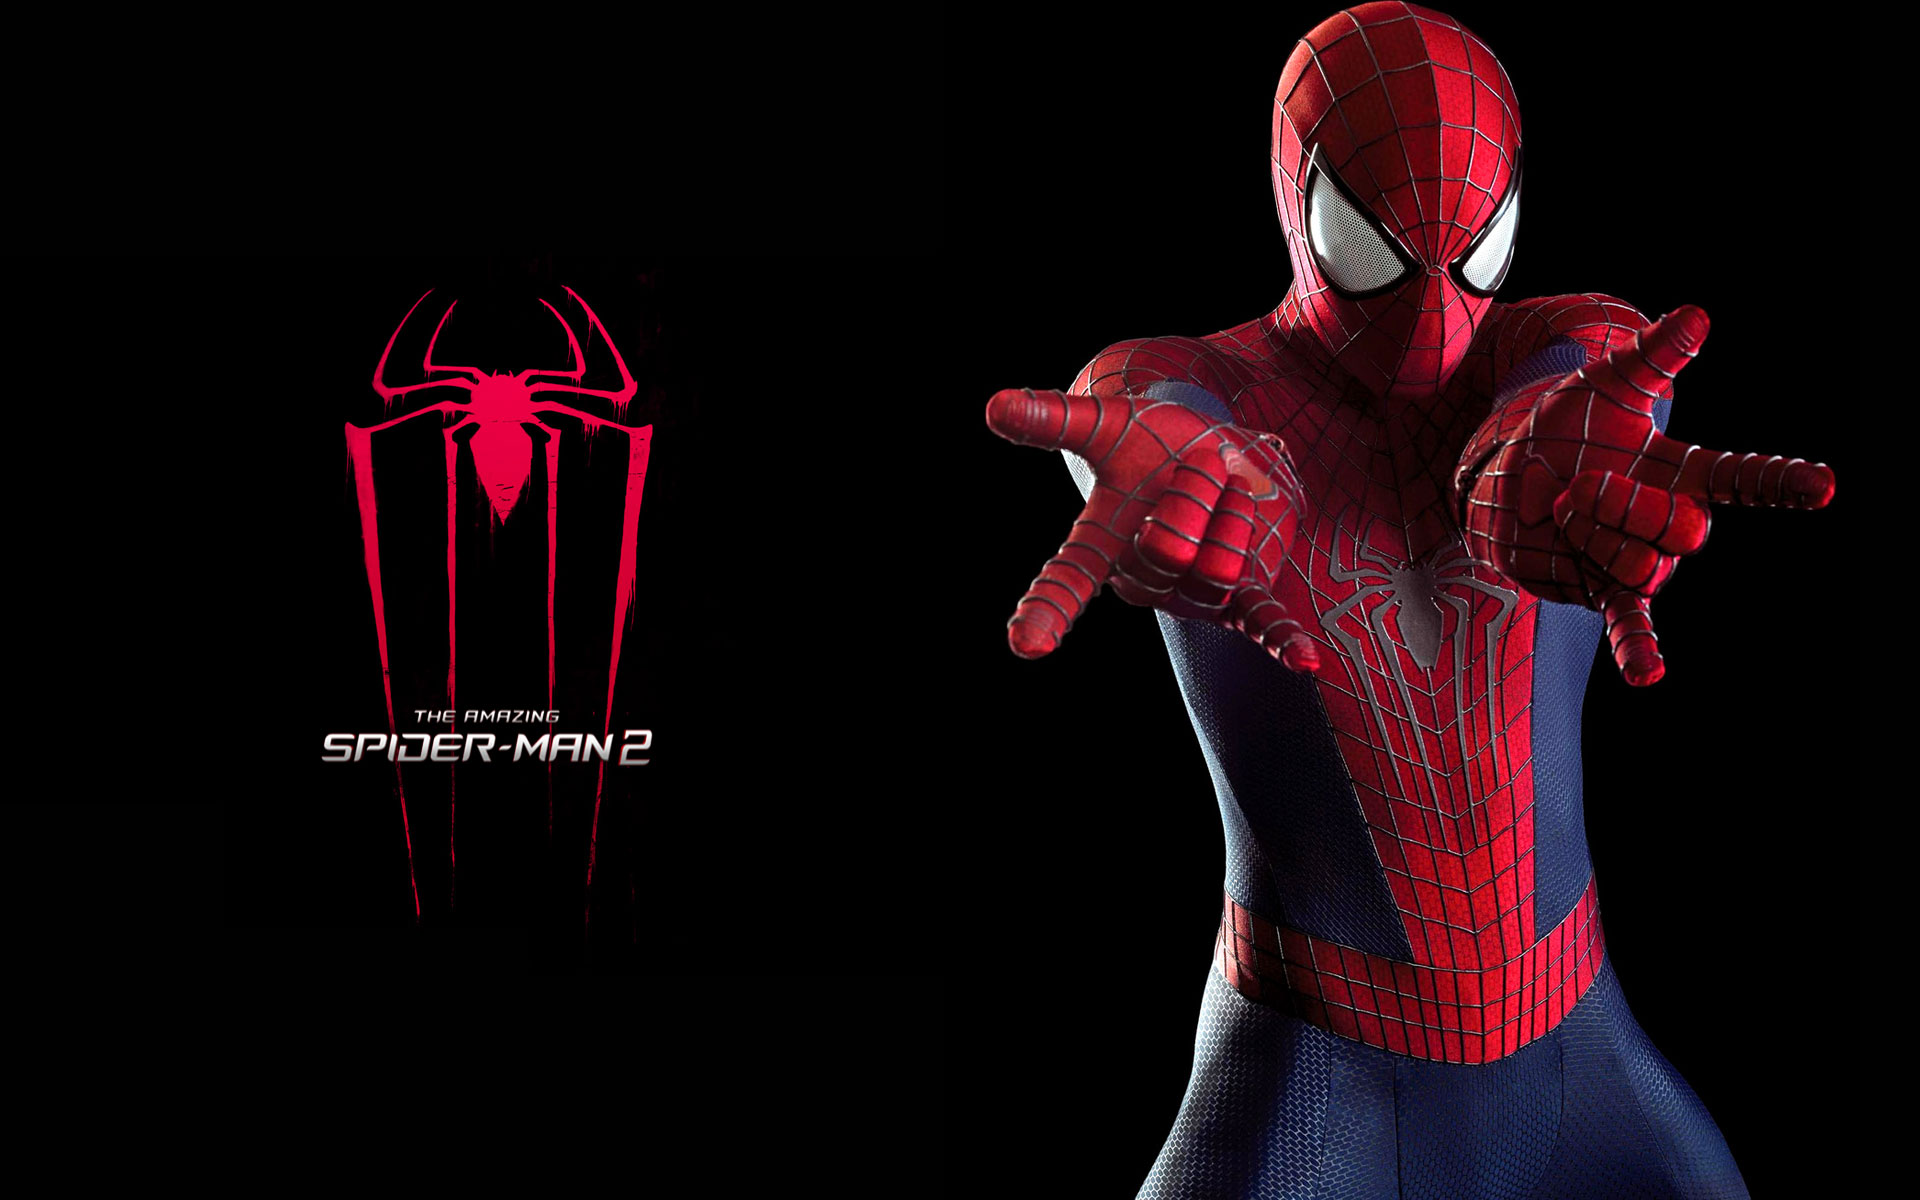 The Amazing Spider Man Wallpapers[HD Cover Photos